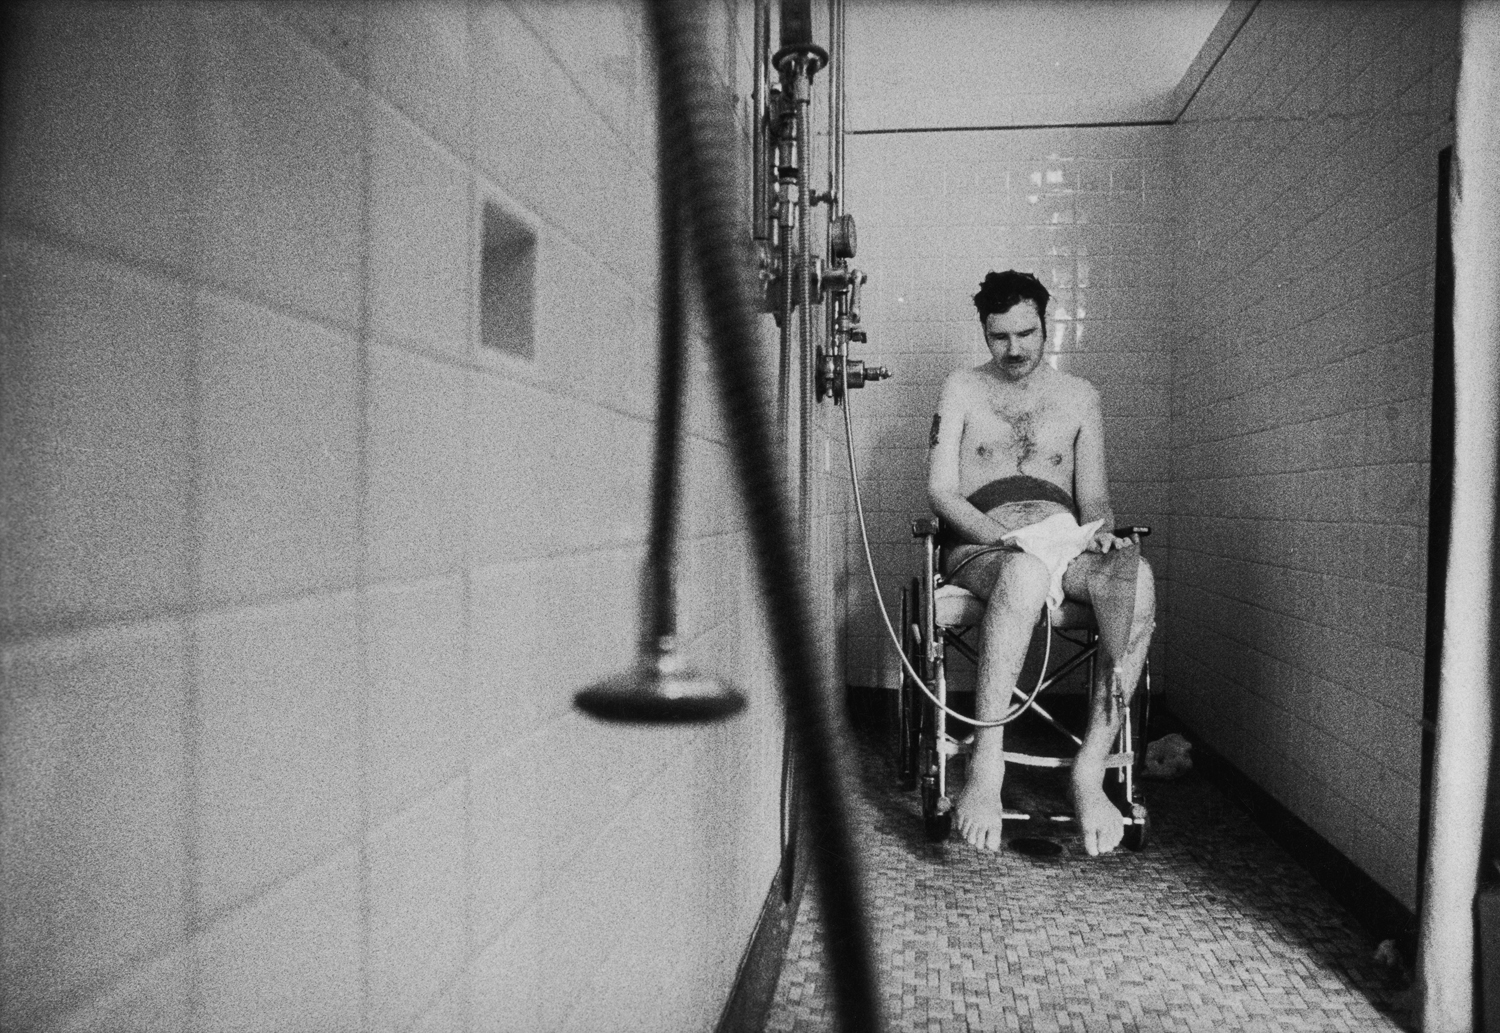 Quadriplegic Marke Dumpert, invalided out of the Marines as a lance corporal, waits helplessly to be dried in a veterans' hospital.